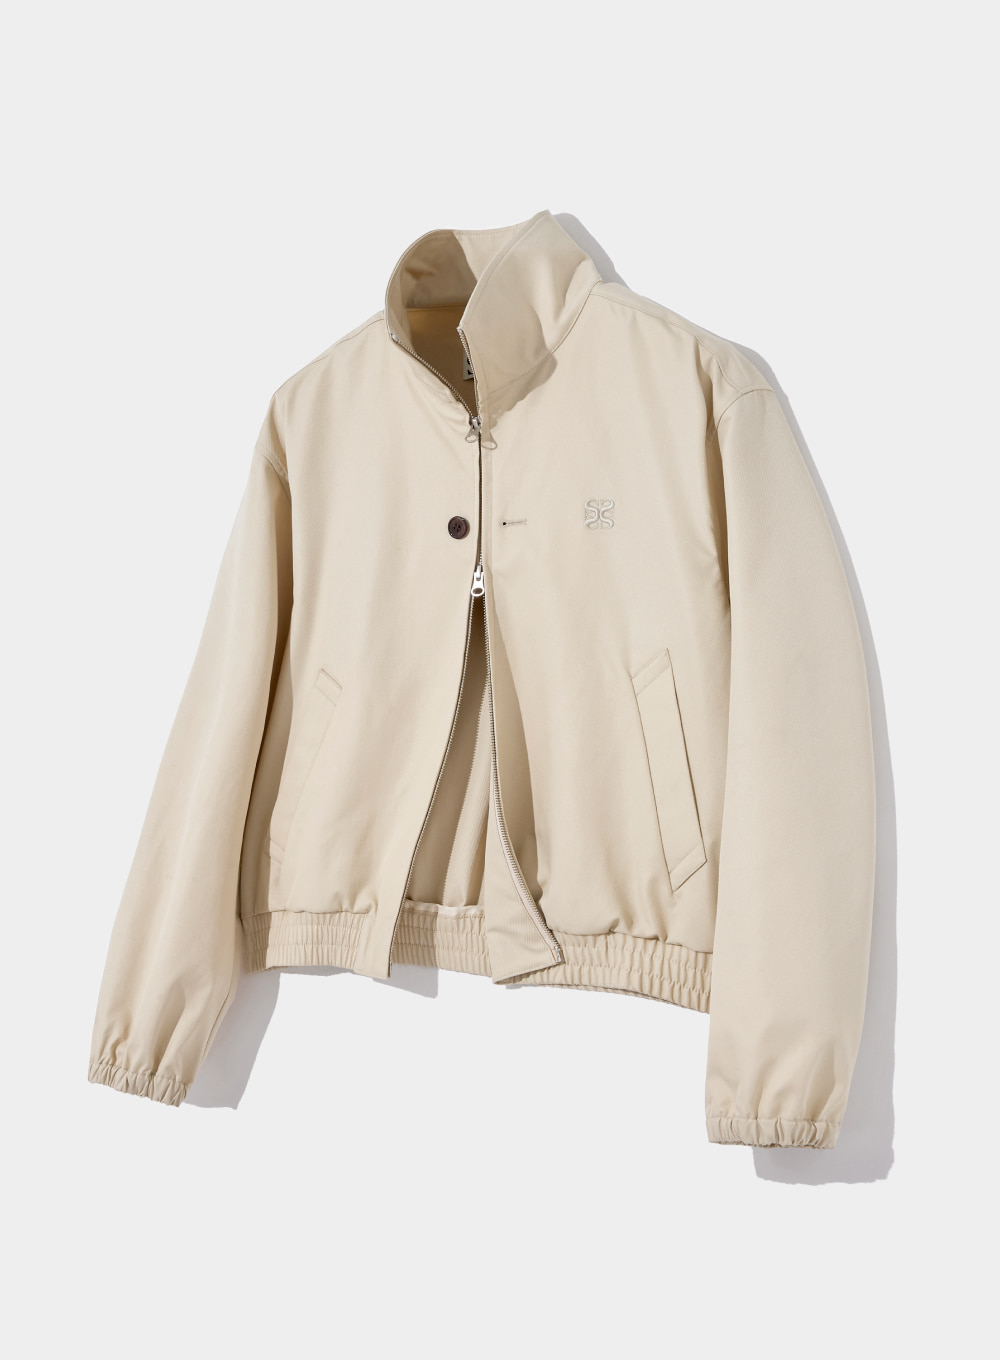 Lecce Two Tone Zip Up Jacket - Beige Ivory